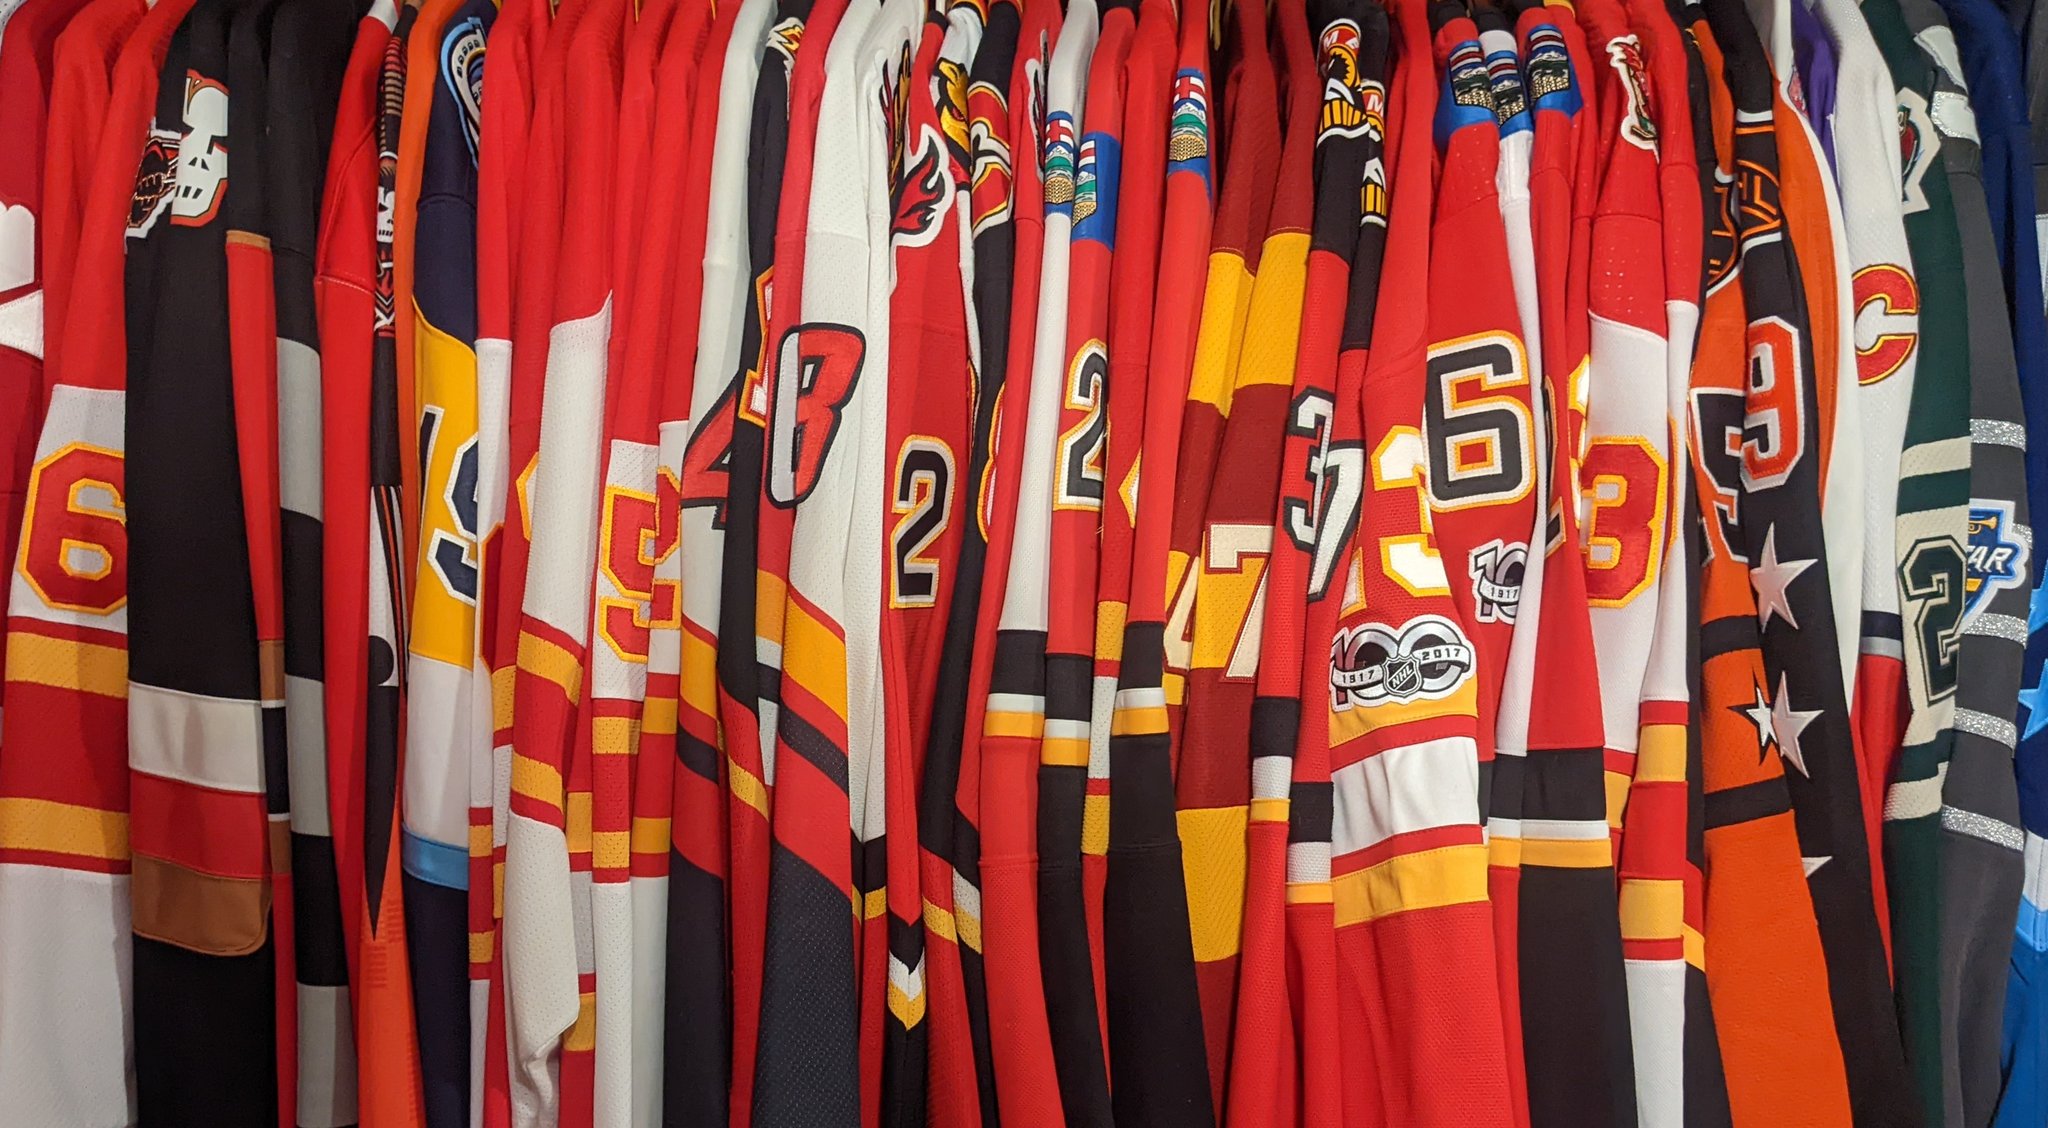 These Flames jersey concepts featuring Blasty are some of the